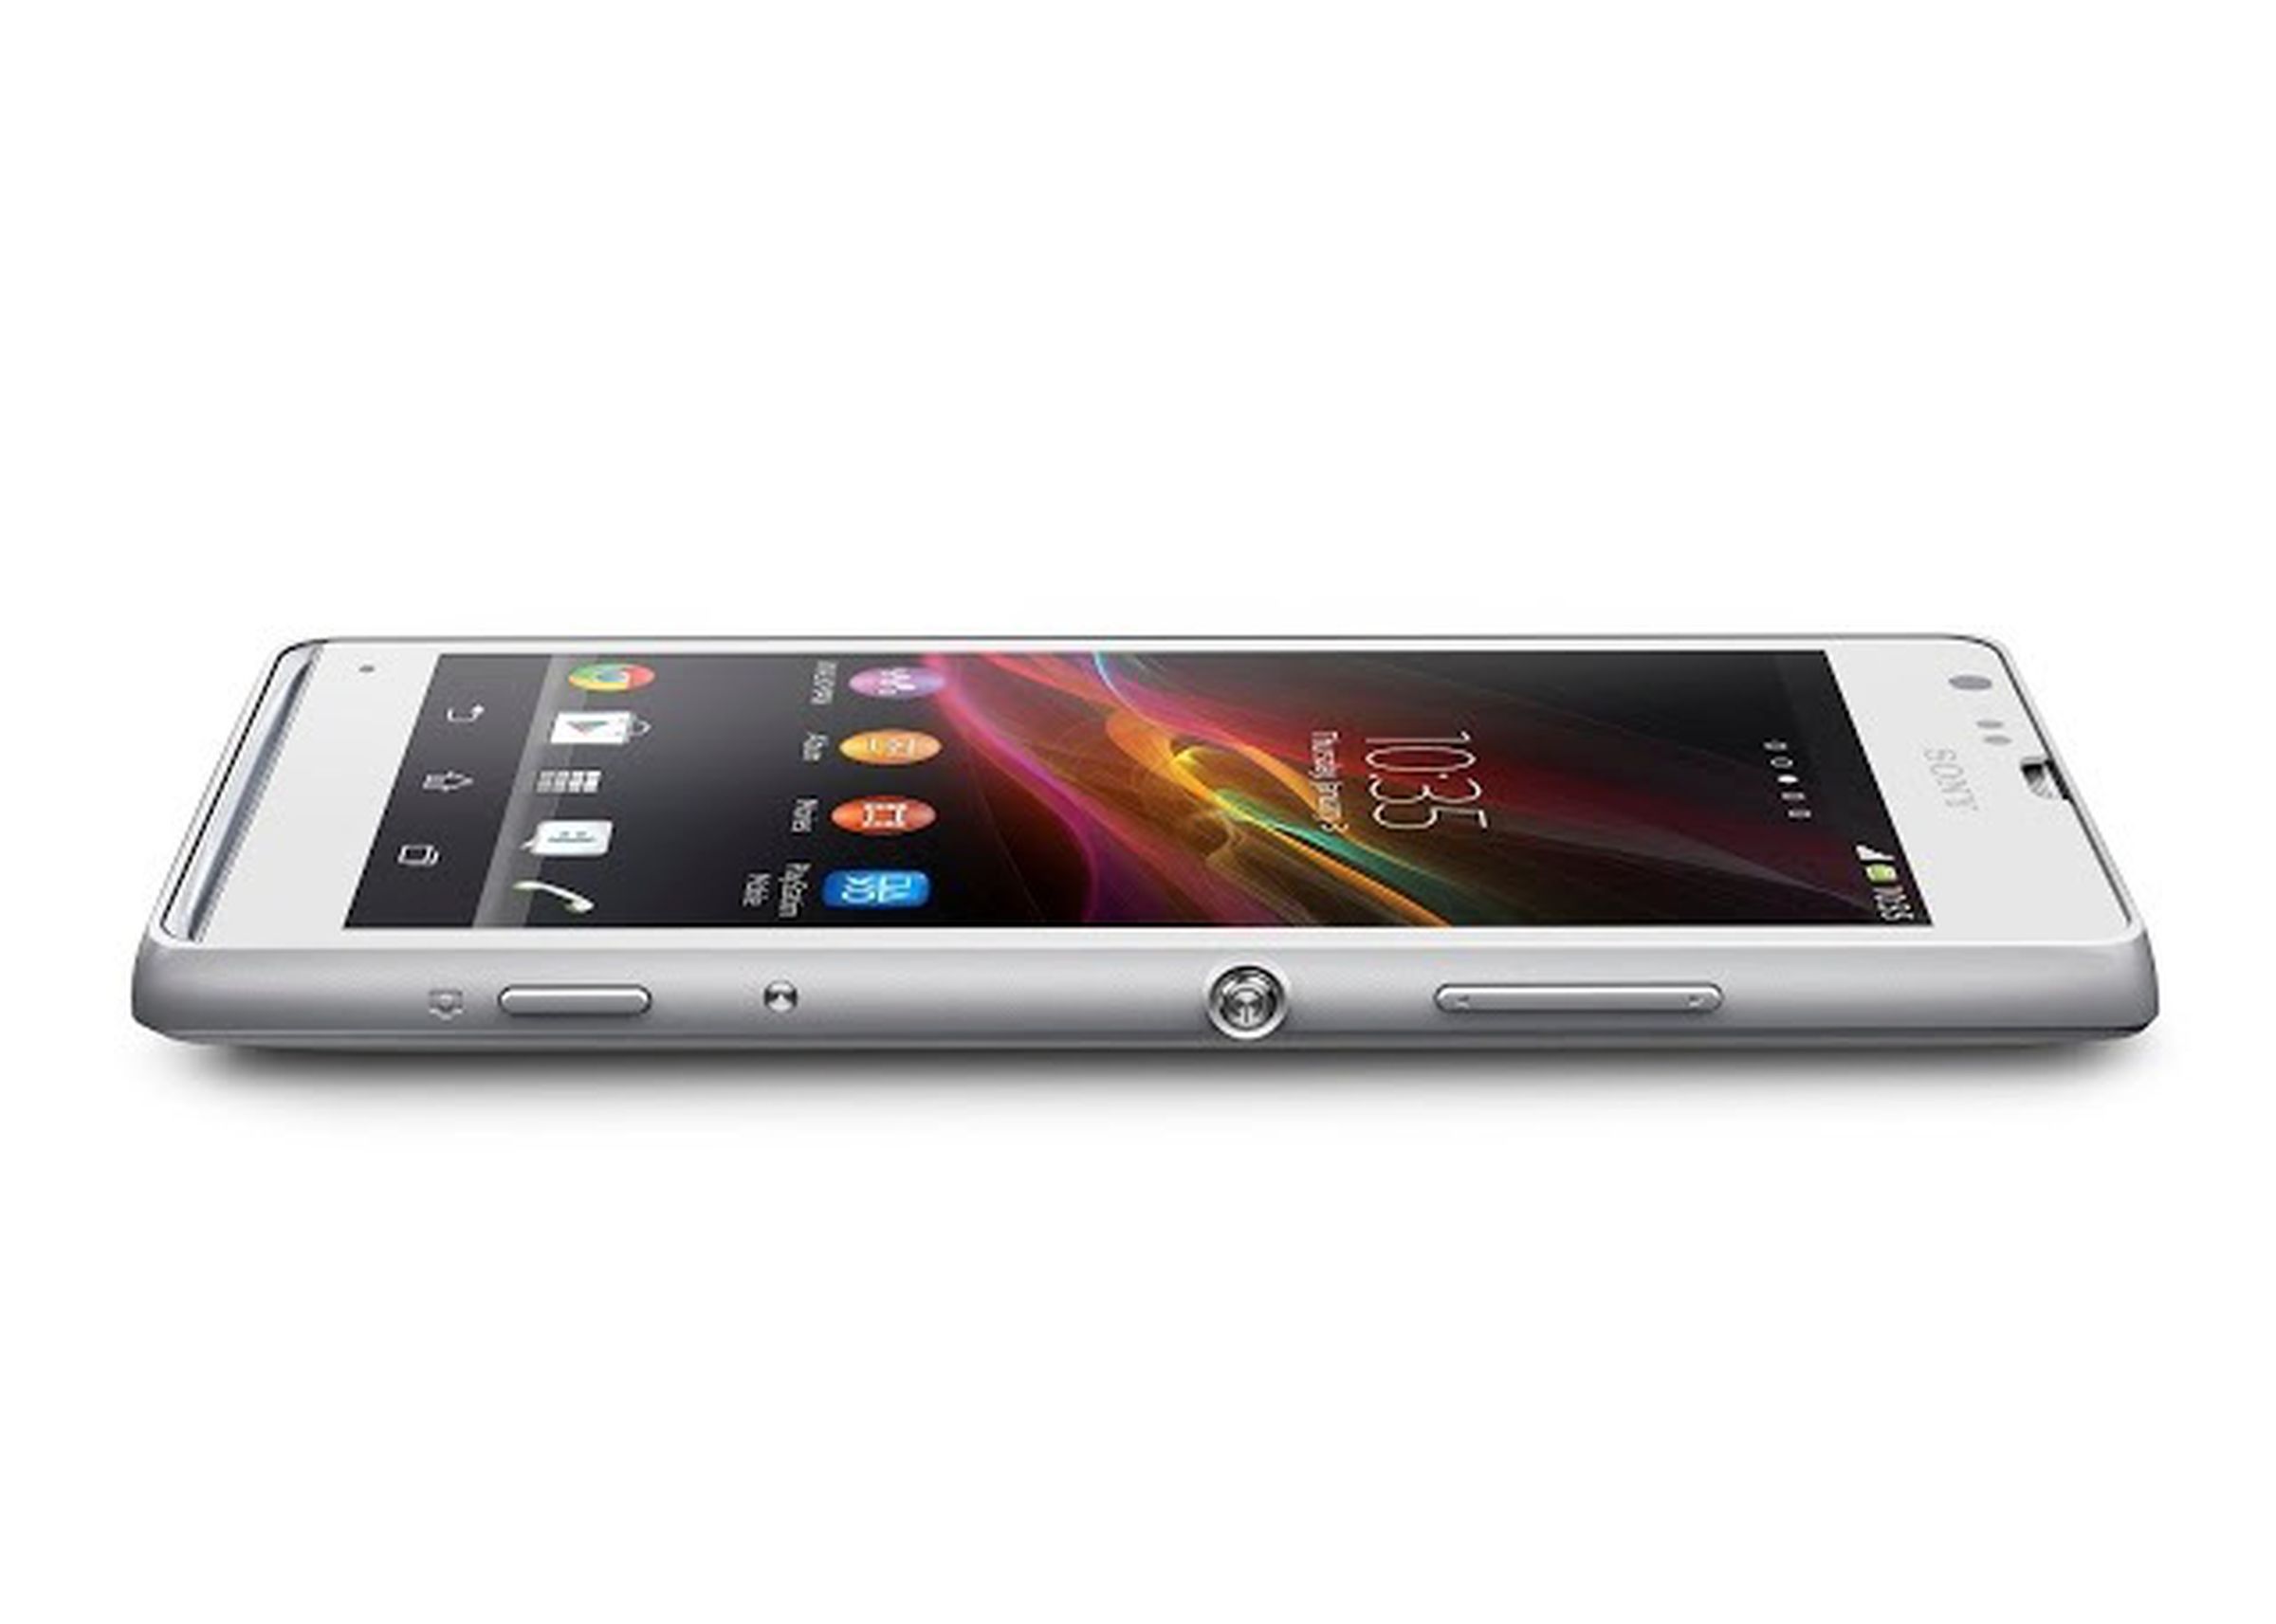 Sony Xperia SP press pictures